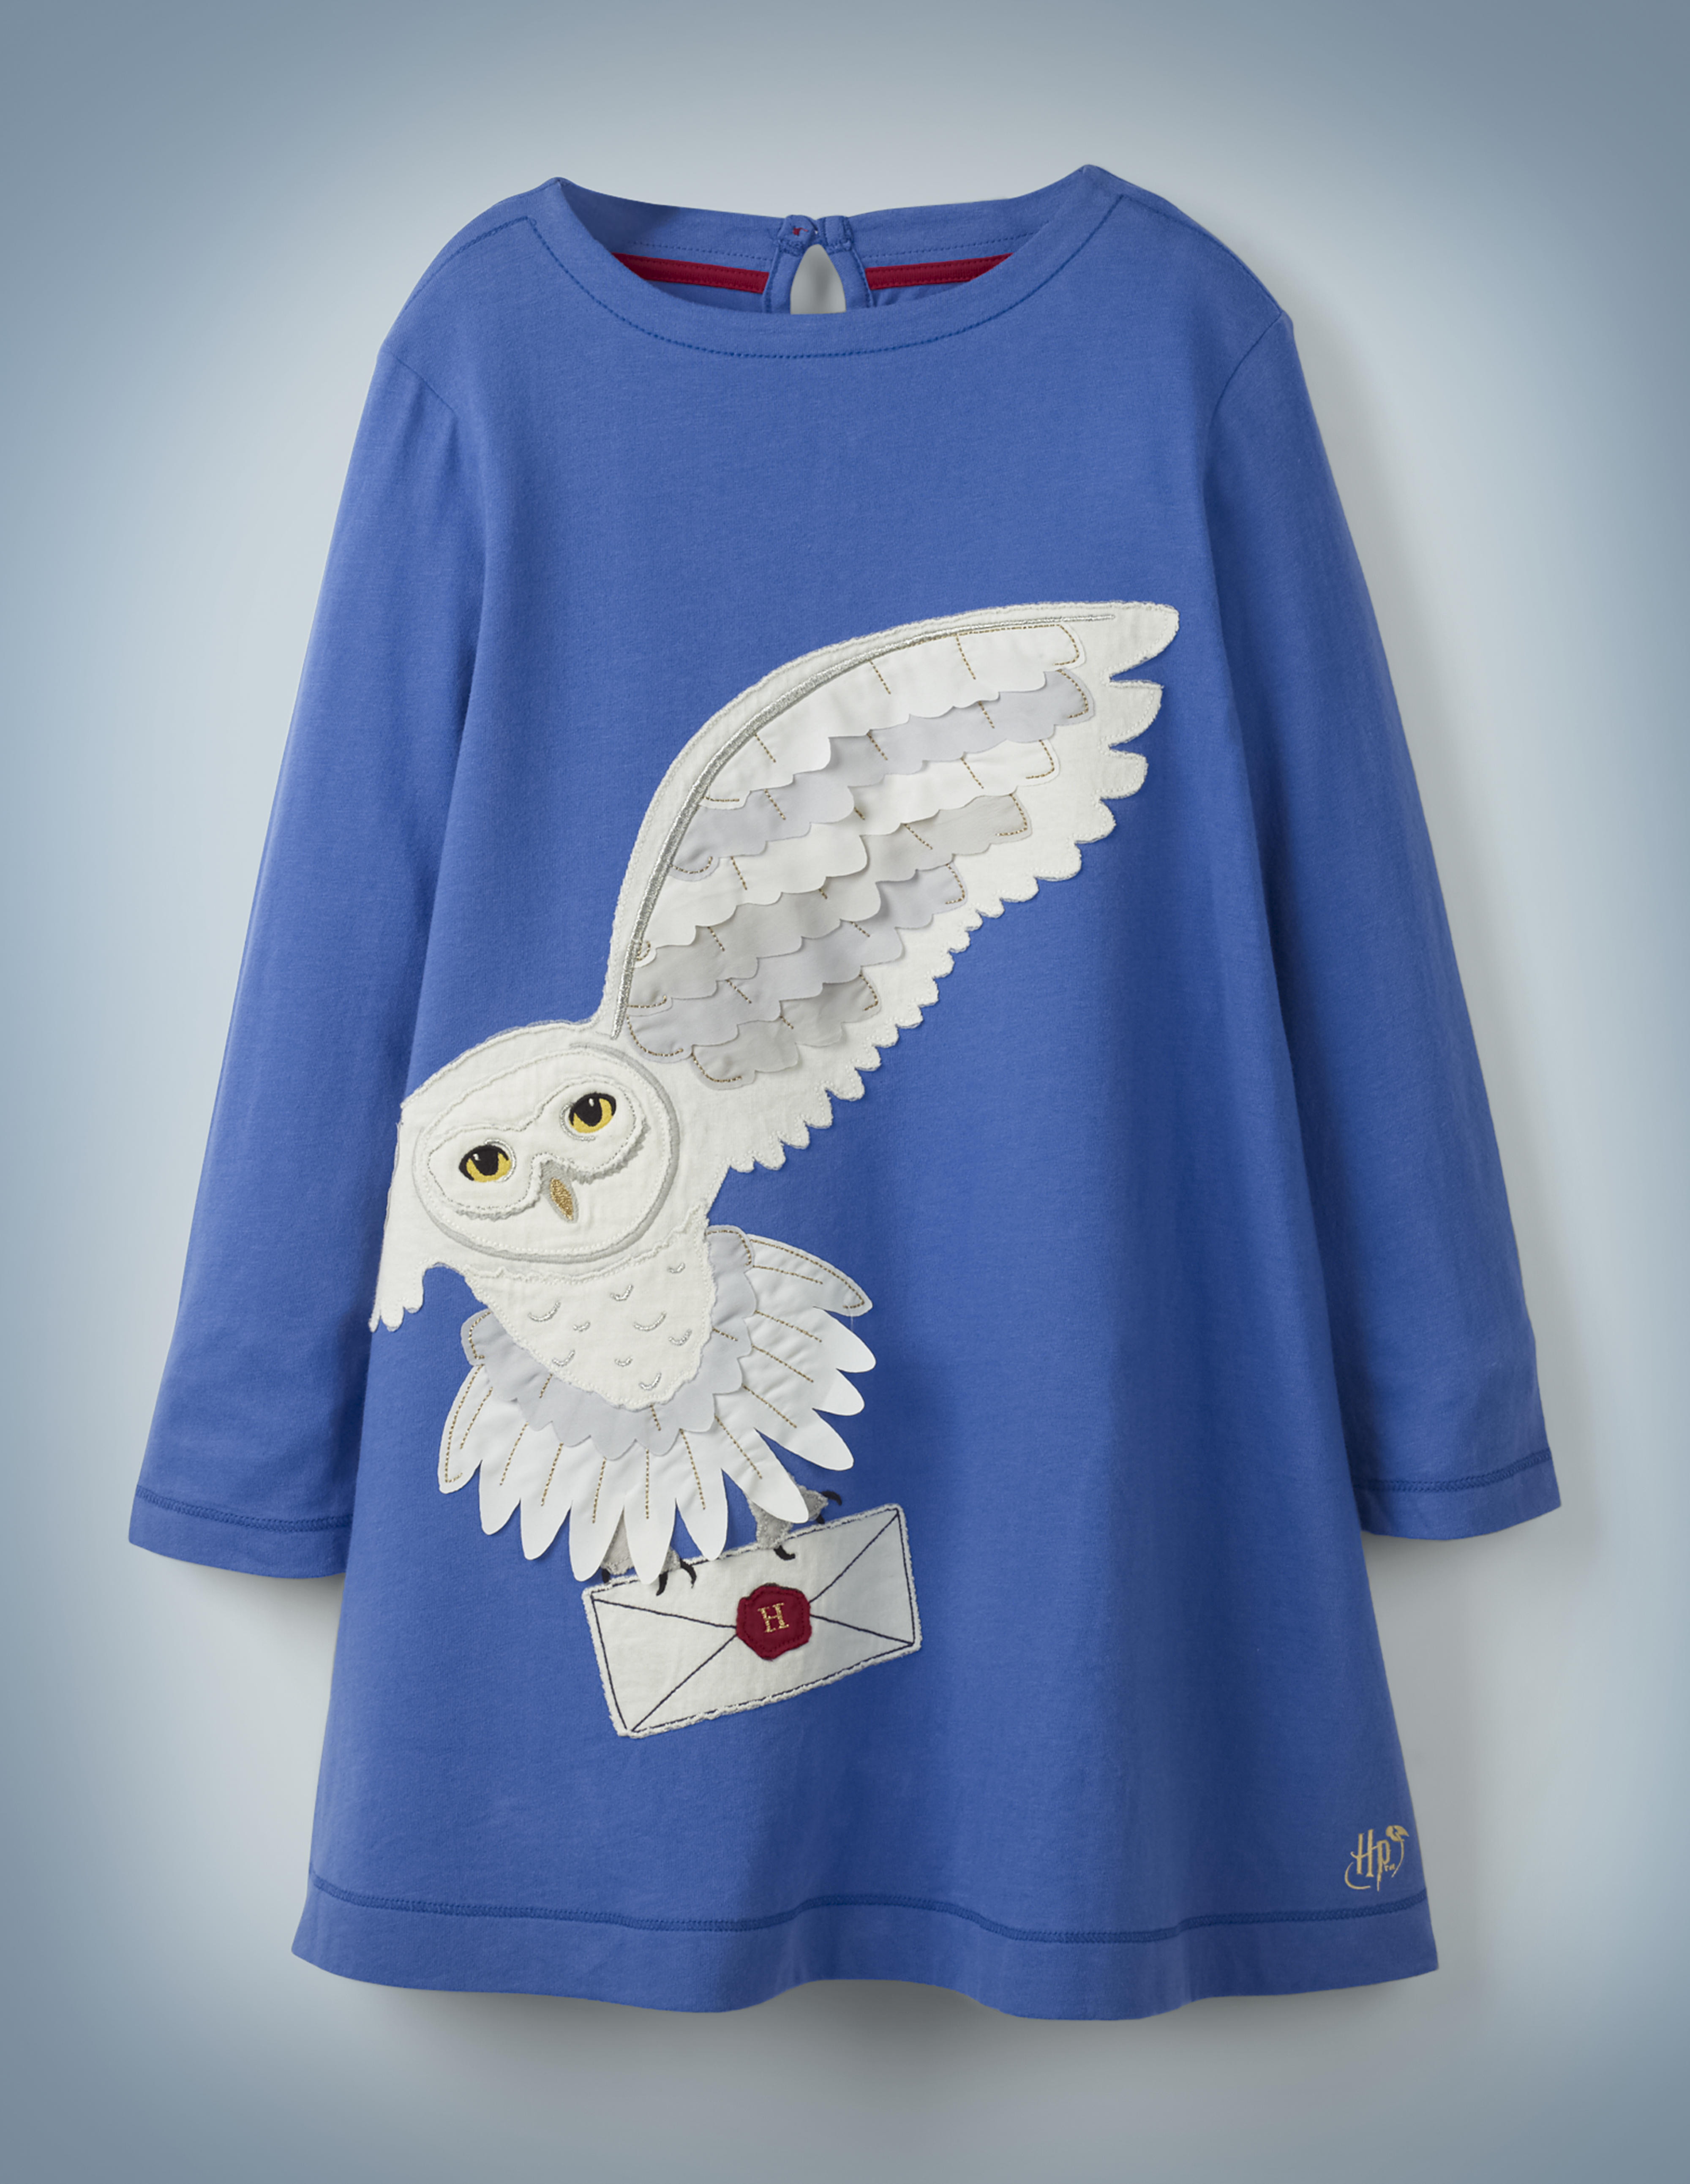 The Mini Boden Hedwig Post Dress in blue features a large, off-center image of Harry Potter’s beloved owl carrying a Hogwarts acceptance letter in her talons. It retails between £28 and £32.